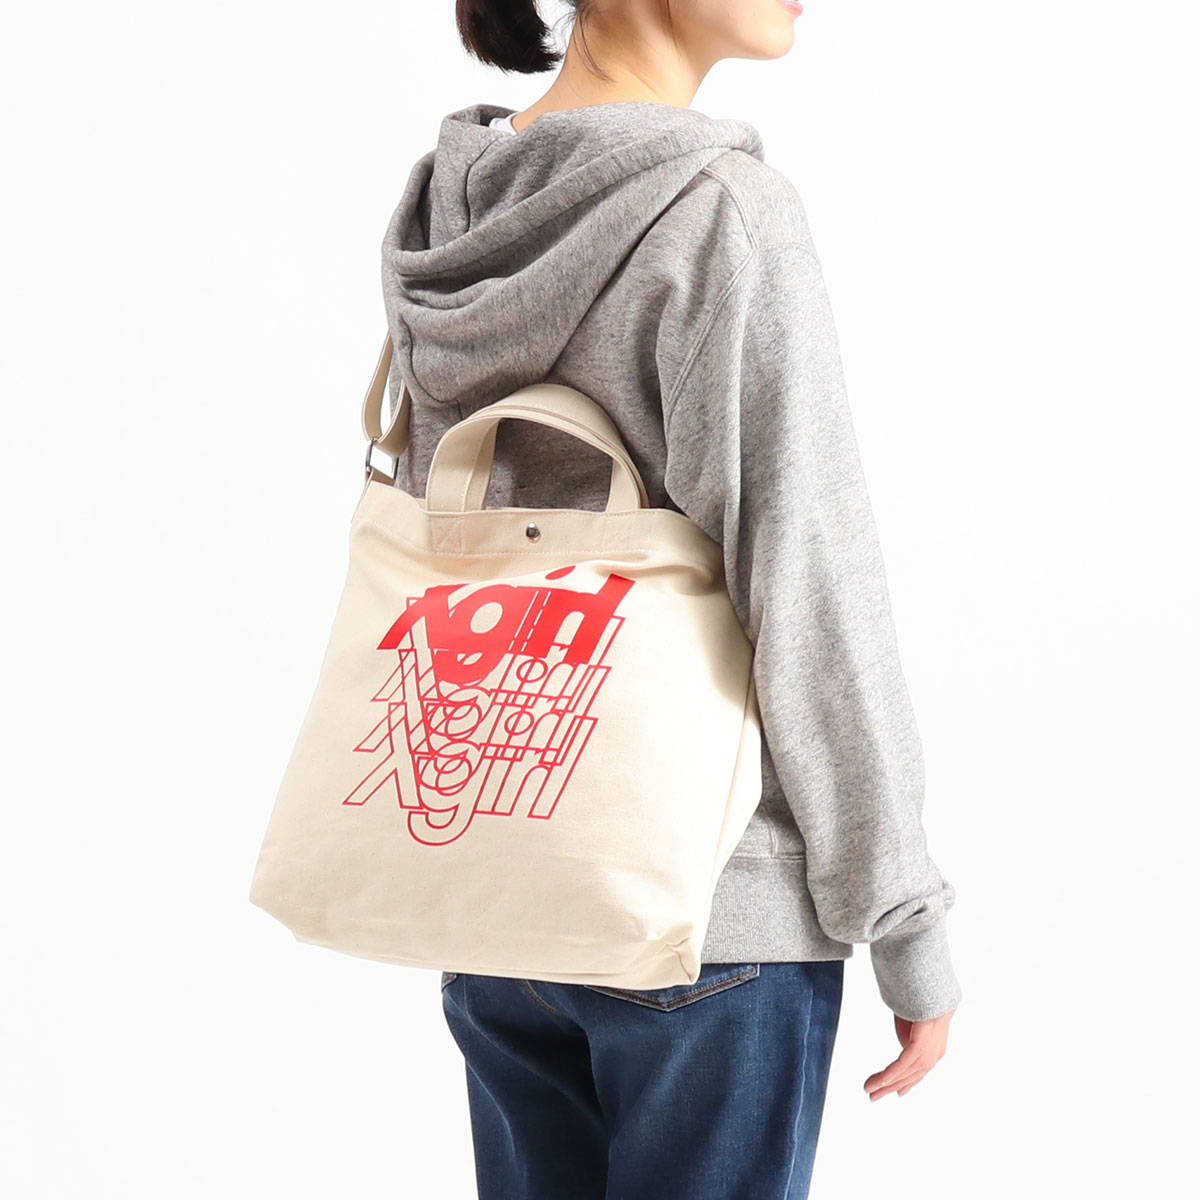 X-girl エックスガール SPECTRUM 2WAY TOTE BAG トートバッグ 05194017 